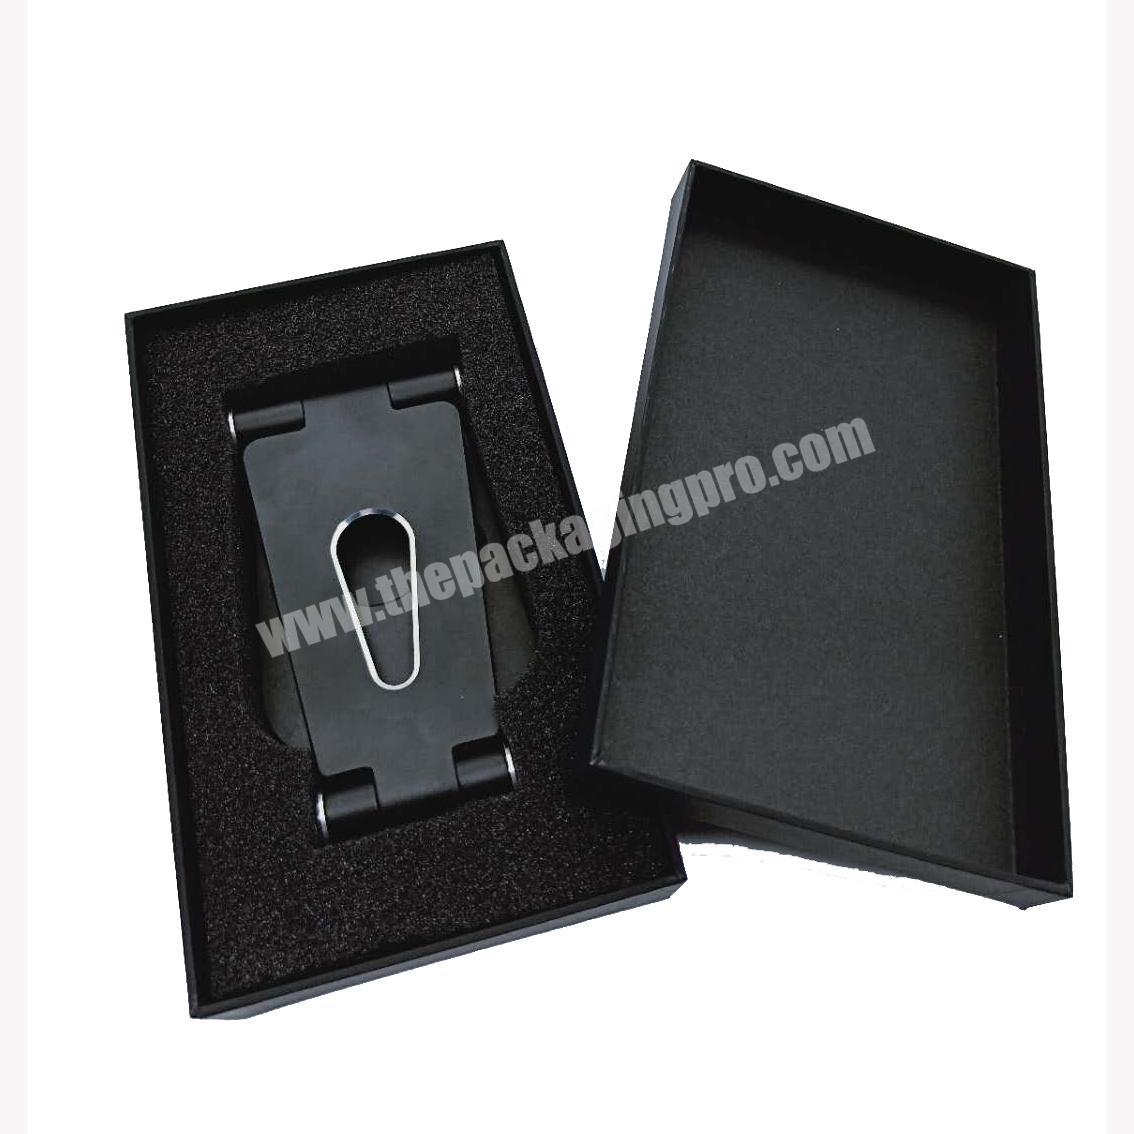 Long black boxes lid off gift box high quality electronic products packaging